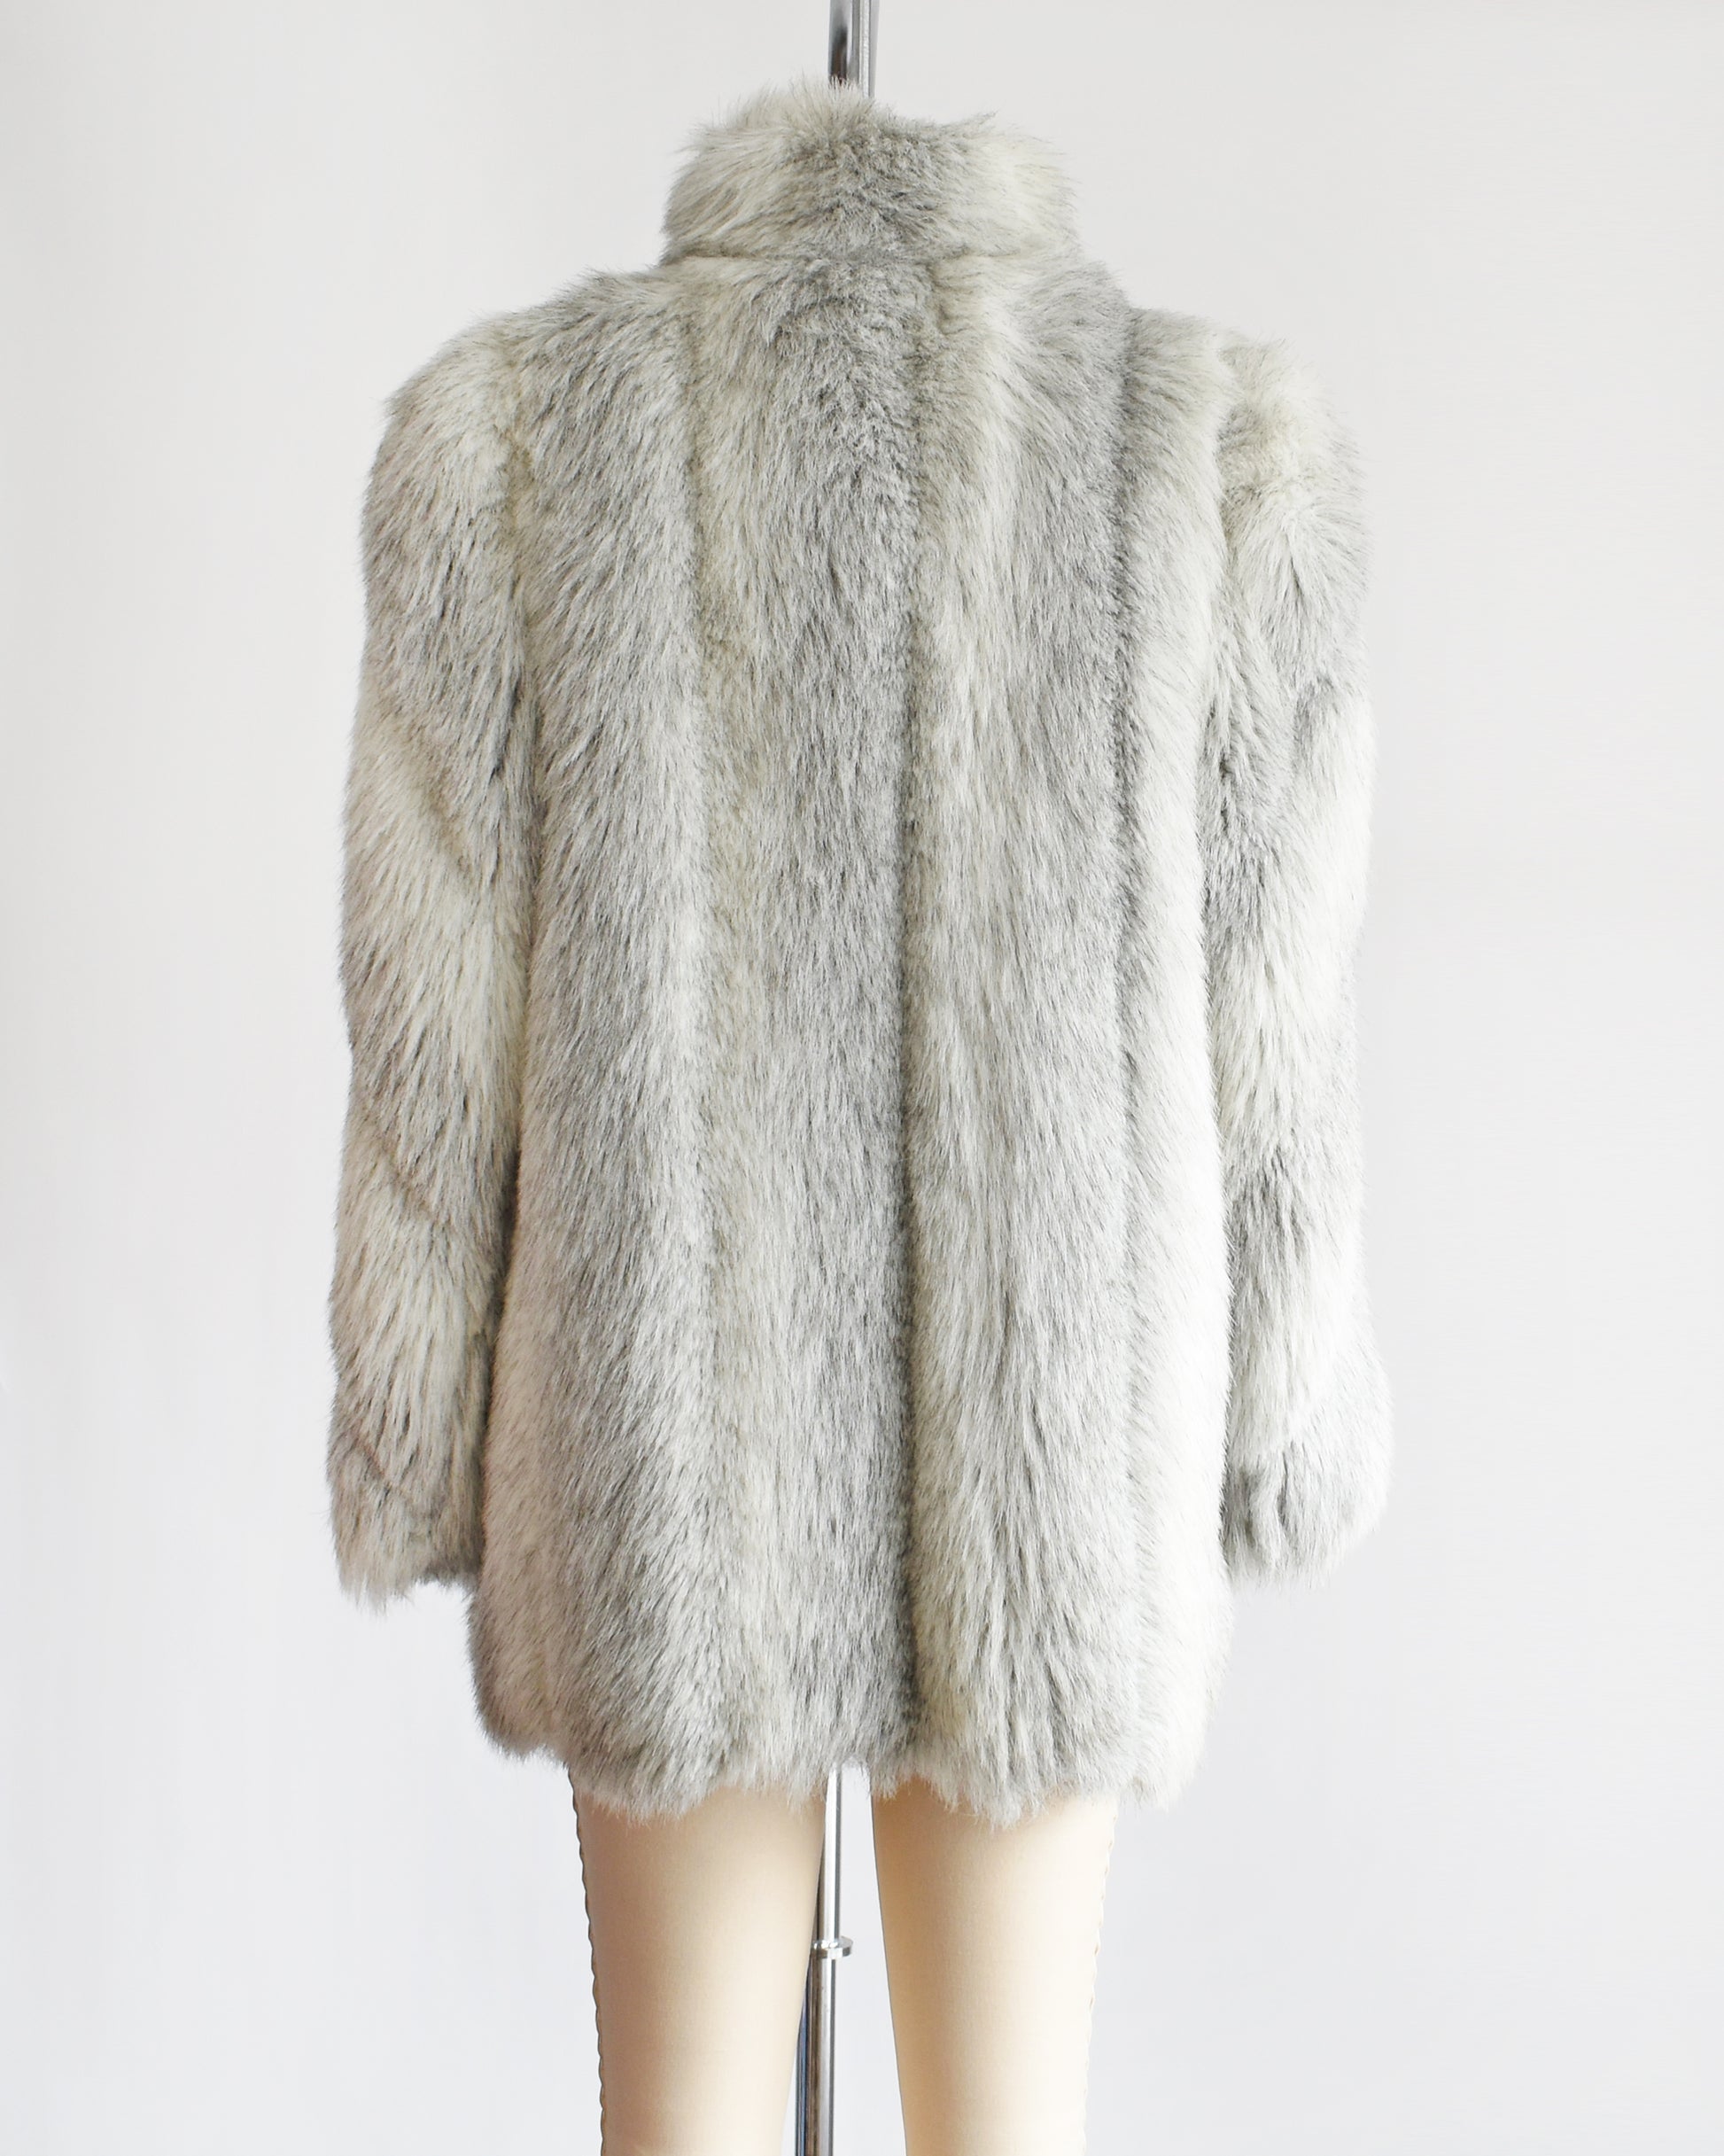 Back view of a vintage 1980s faux fur coat that features a plush white faux fur with light and dark gray stripes, a high collar, and structured puffed shoulders.